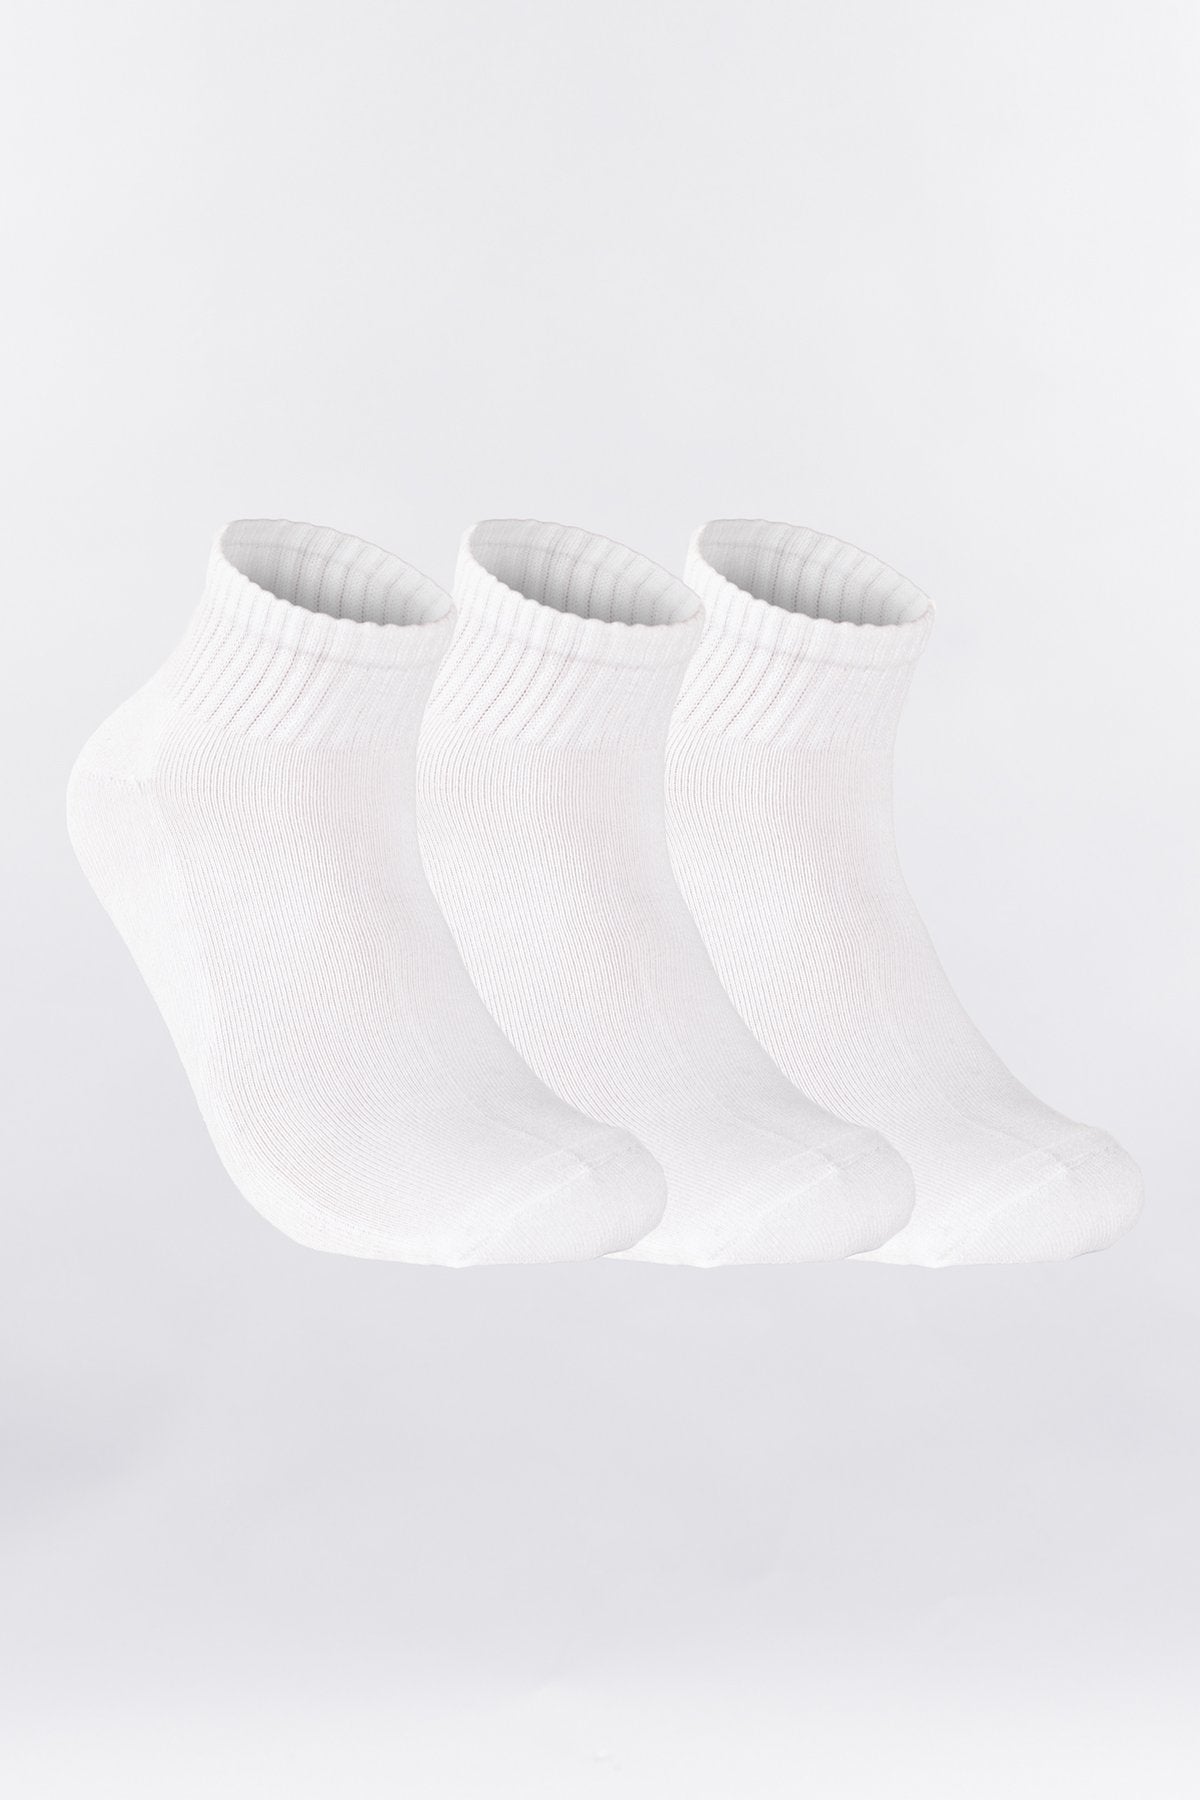 CITY LAB ANKLE WHITE SOCK - (3 PACK)